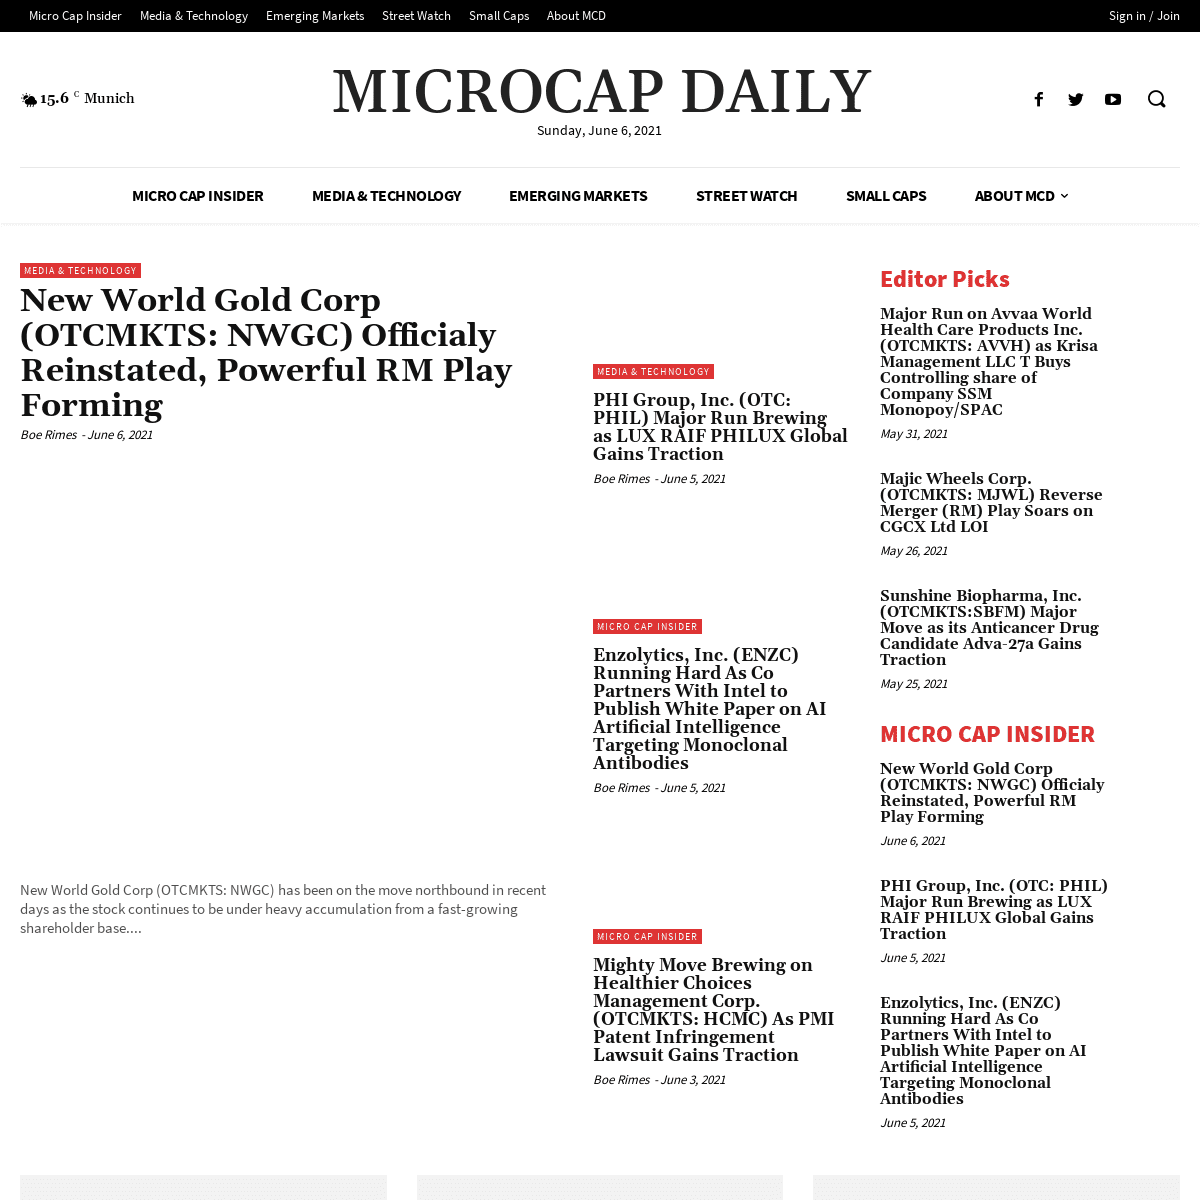 A complete backup of https://microcapdaily.com